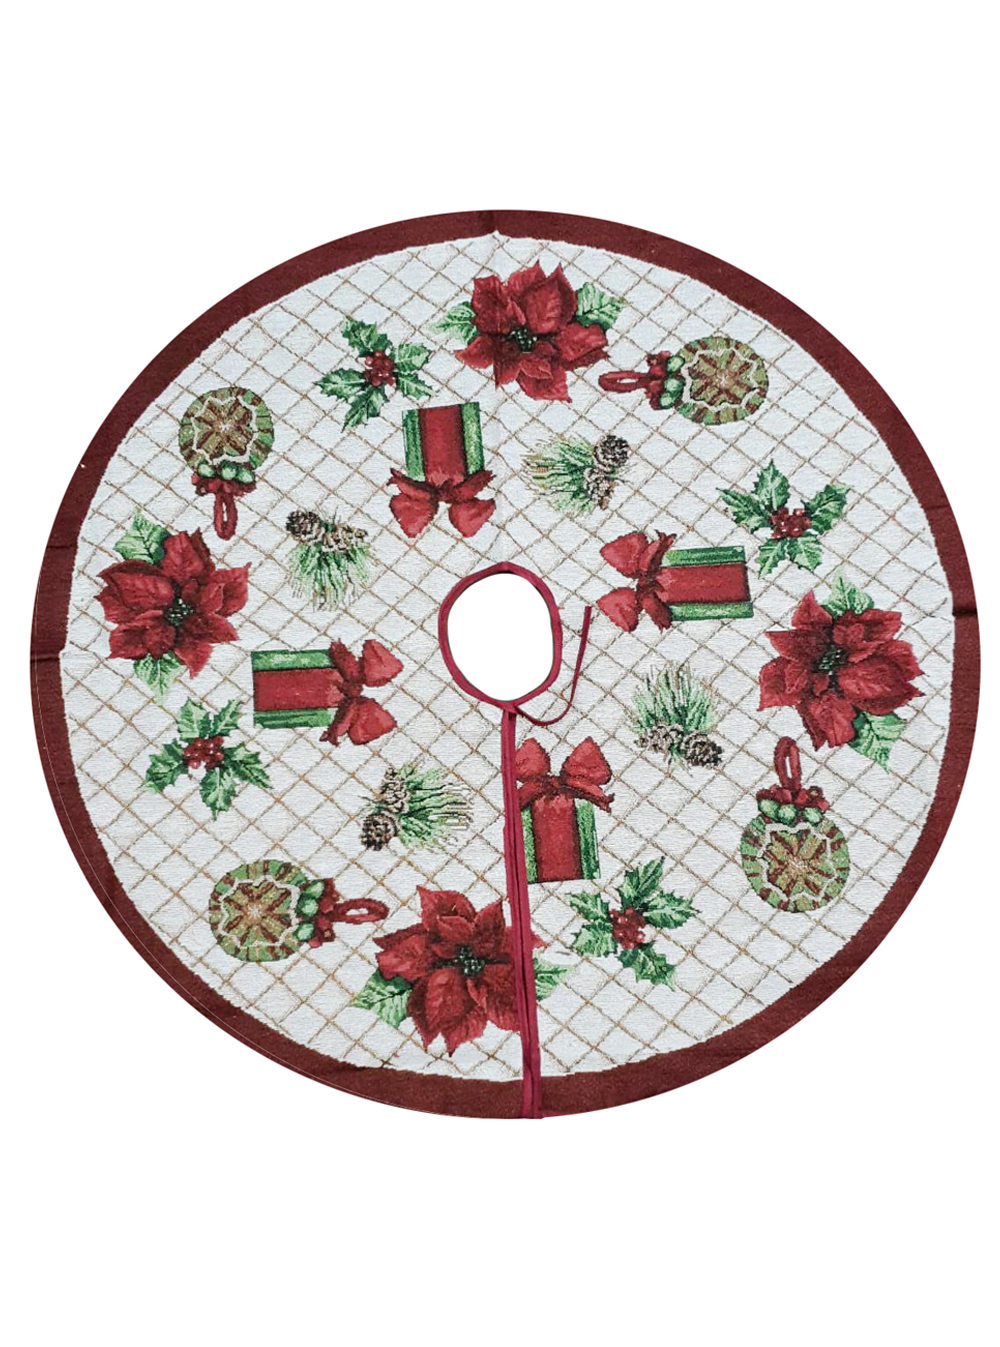 Tree Skirt with Christmas elements (Pollyanna)